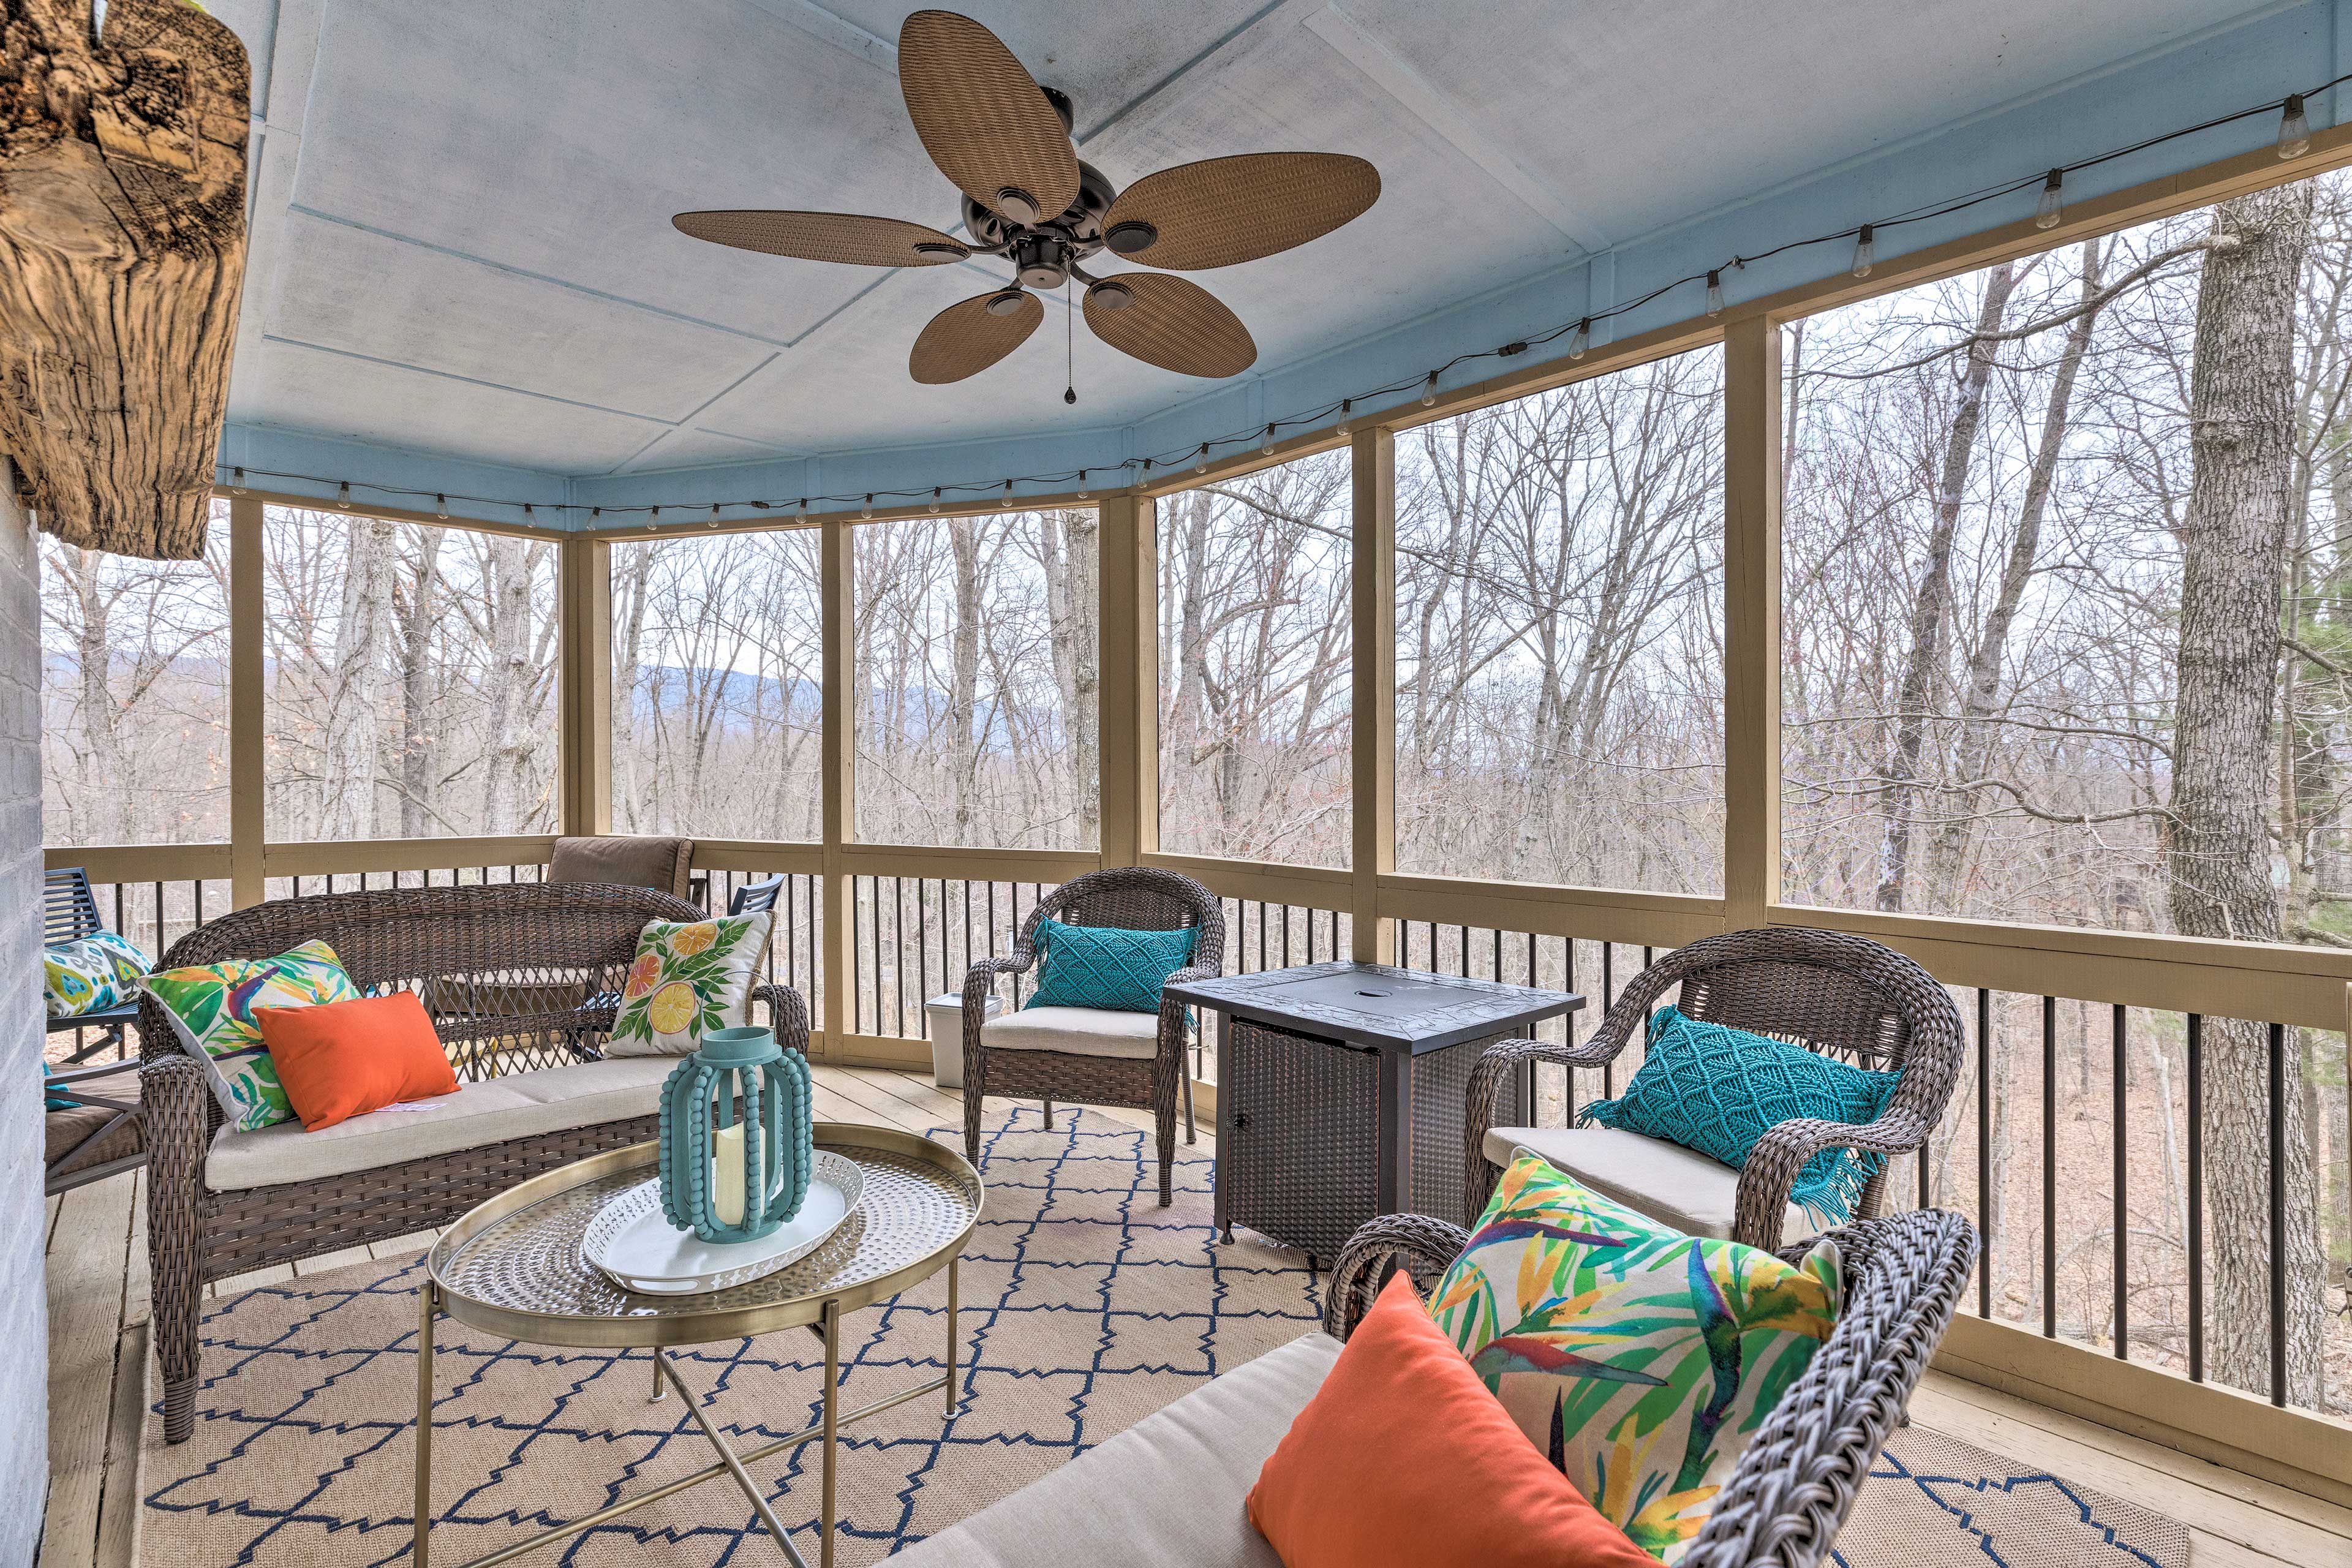 Property Image 2 - Modern Home: Deck, BBQ, Games, Fire Pit, & More!